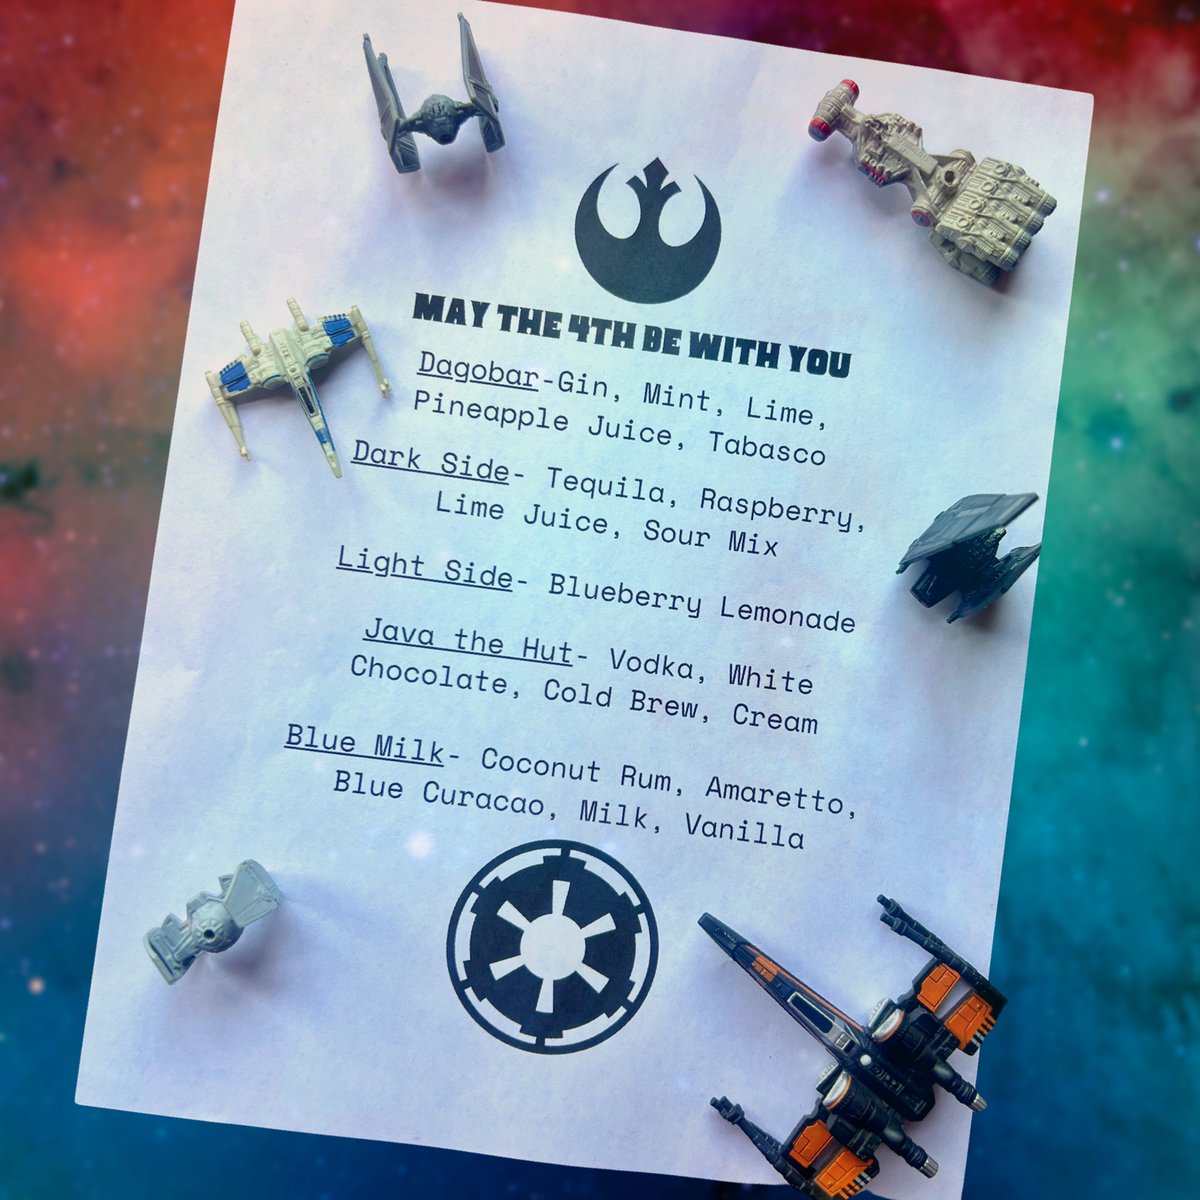 We're gonna be celebrating #StarWarsDay all day long in #OldCityKnox!! Fly by and check out these delicious cocktails--available today only!! #MayThe4thBeWithYou #BarleysKnoxville #Knoxville #KnoxRocks